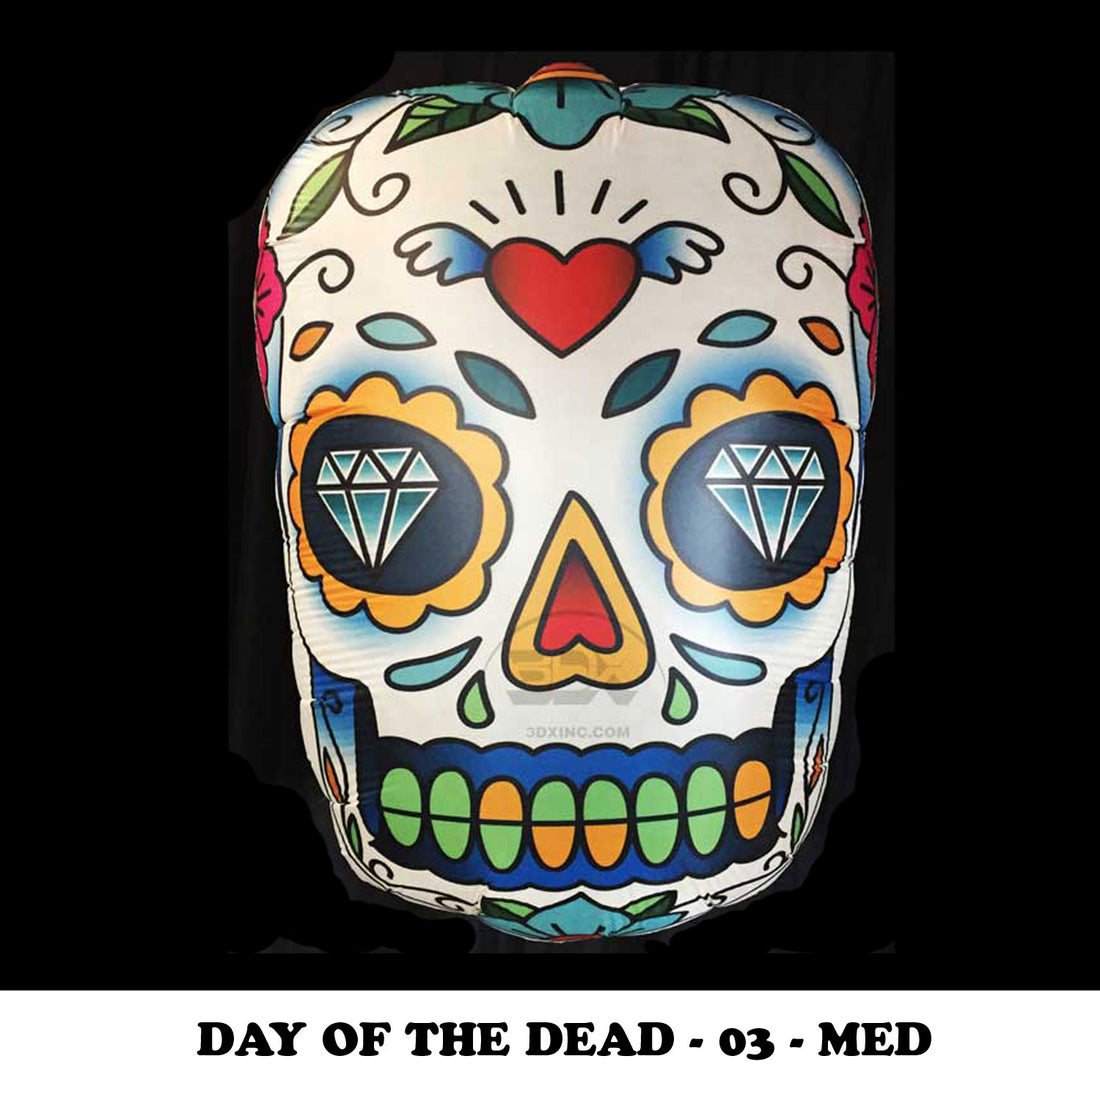 DAY OF THE DEAD - 03 - MED